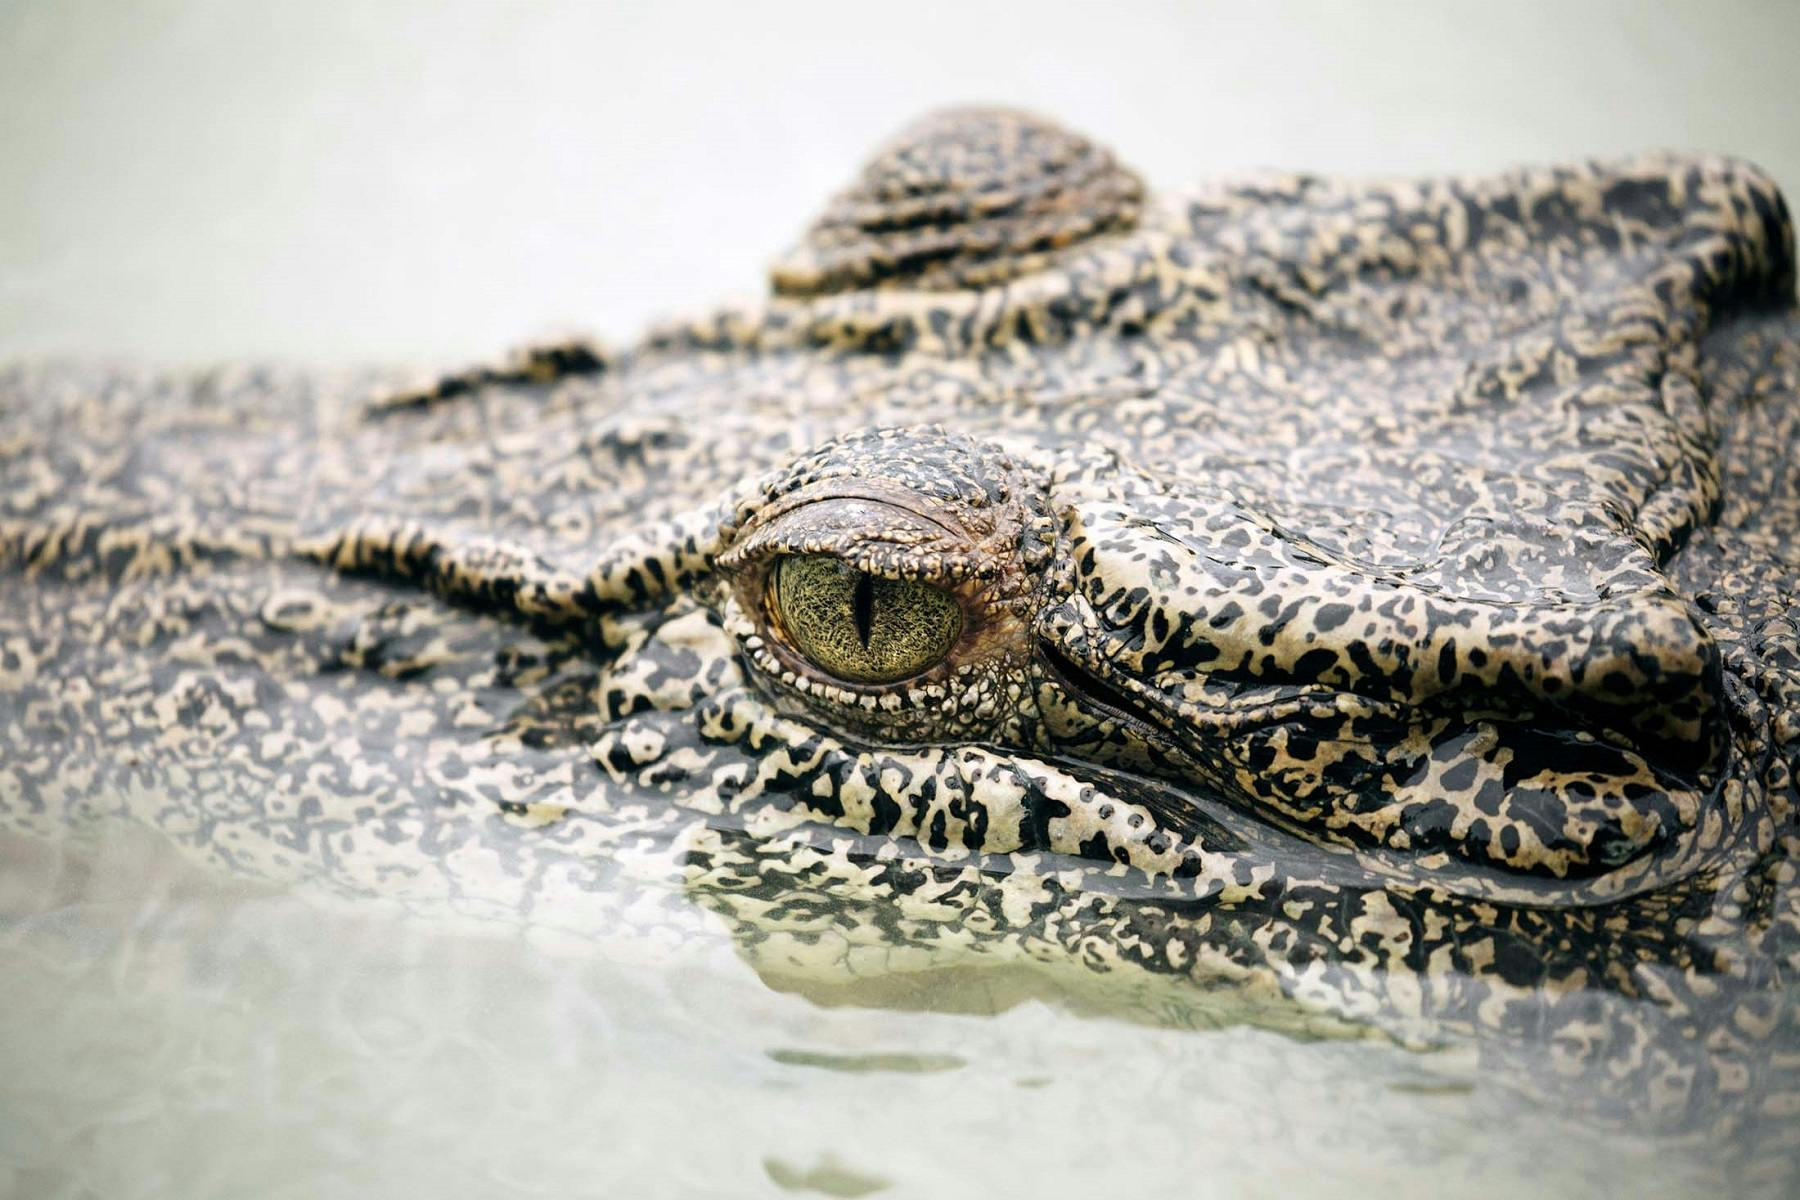 King of the Tides: The Saltwater Crocodile of Australia's Hunter River